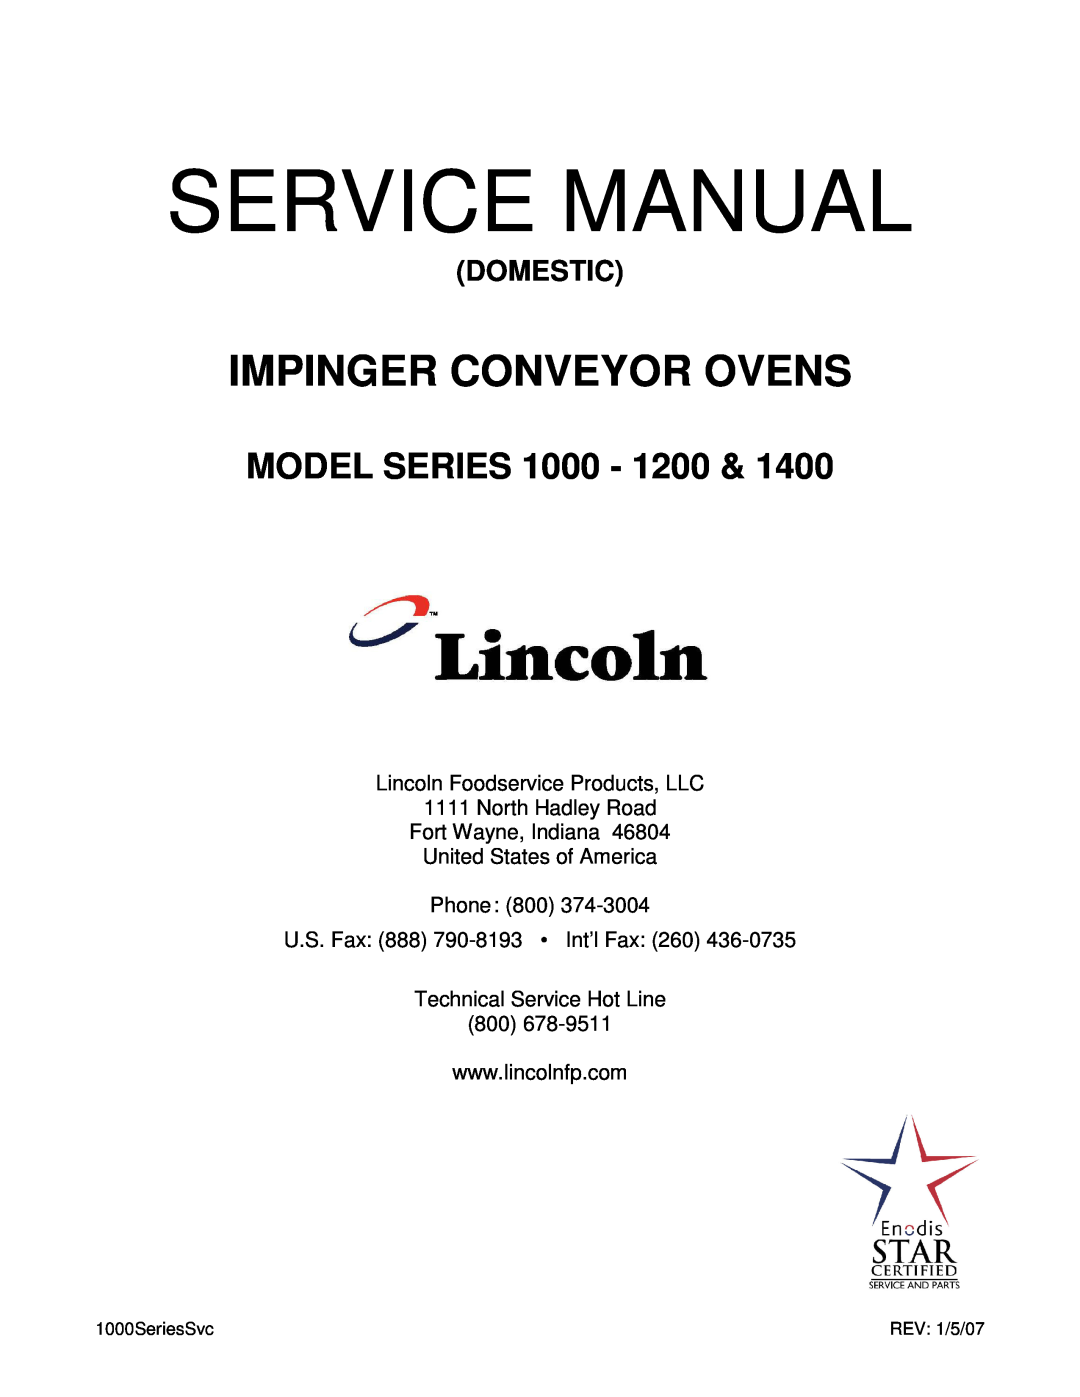 Lincoln 1200, 1400, 1000 operating instructions Installation & Operating Instructions, Impinger Conveyor Ovens 